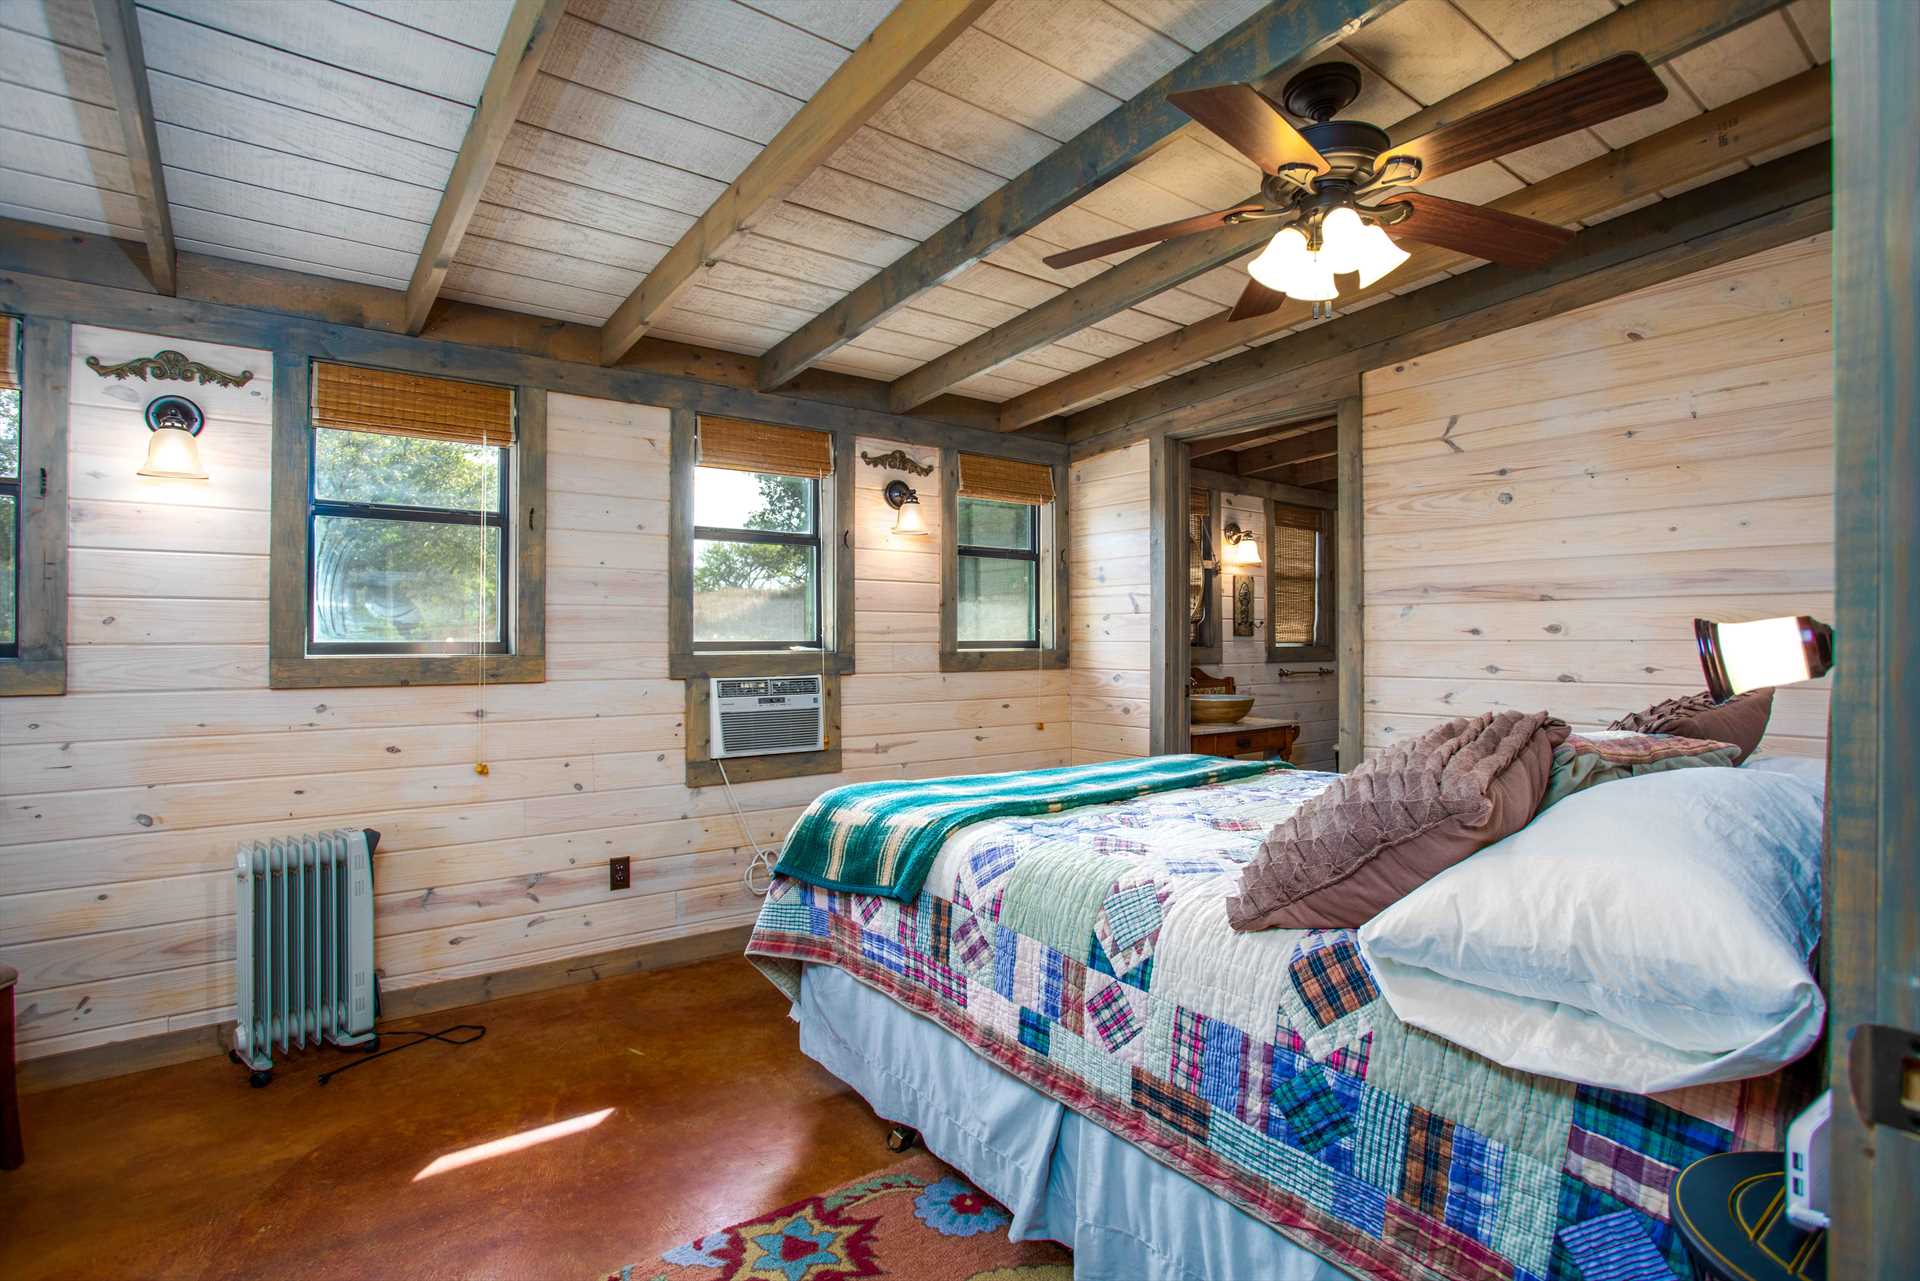                                                 Bright paneling and ceiling work accents the master bedroom, and it has a comfy queen-sized bed, too! All bed and bath linens are provided for your stay, as well.